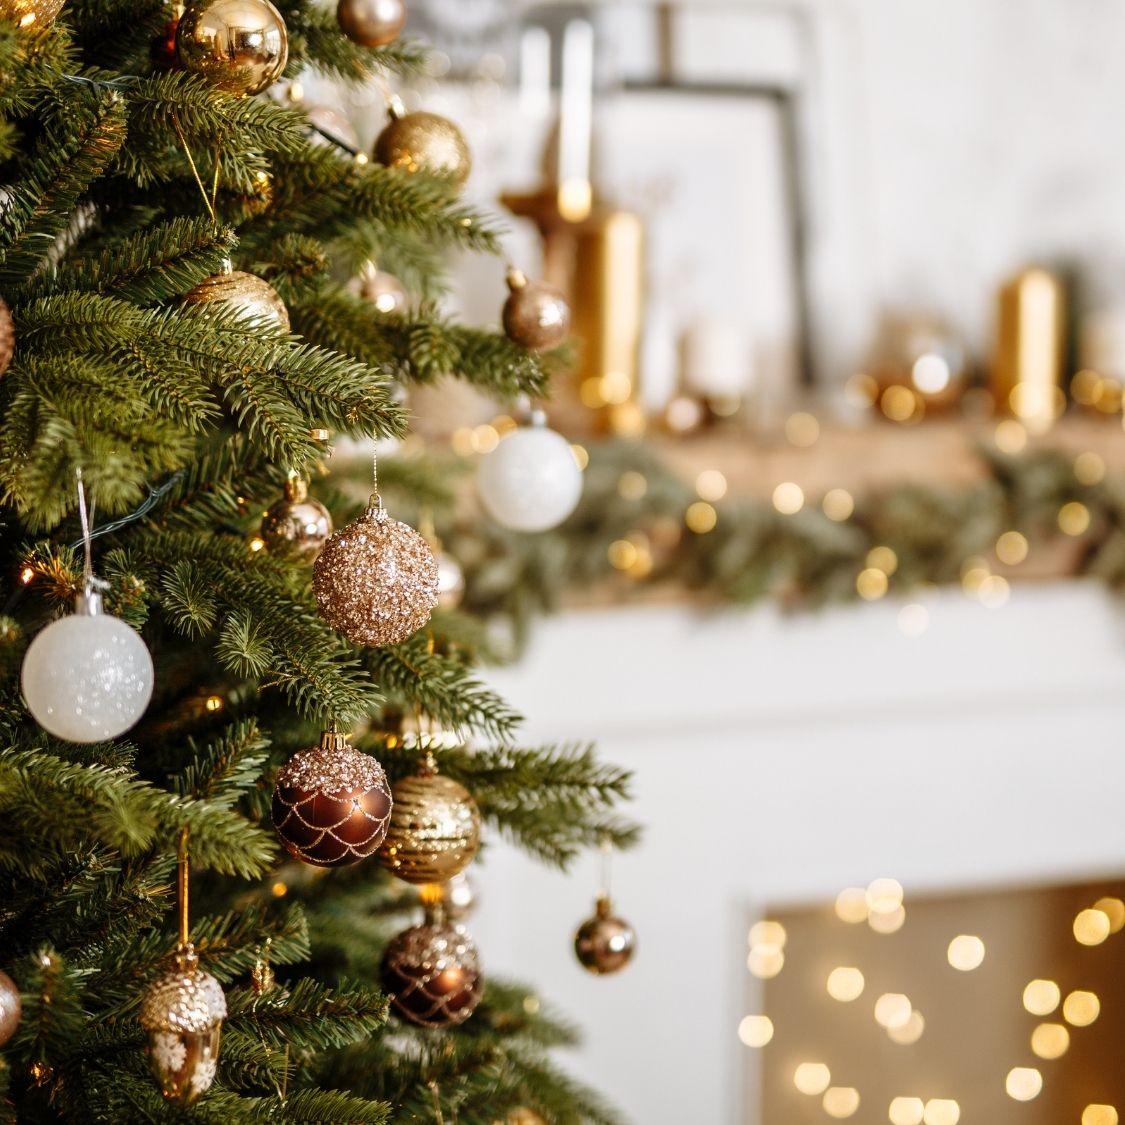 Creative Ways To Decorate Your Home for the Holidays